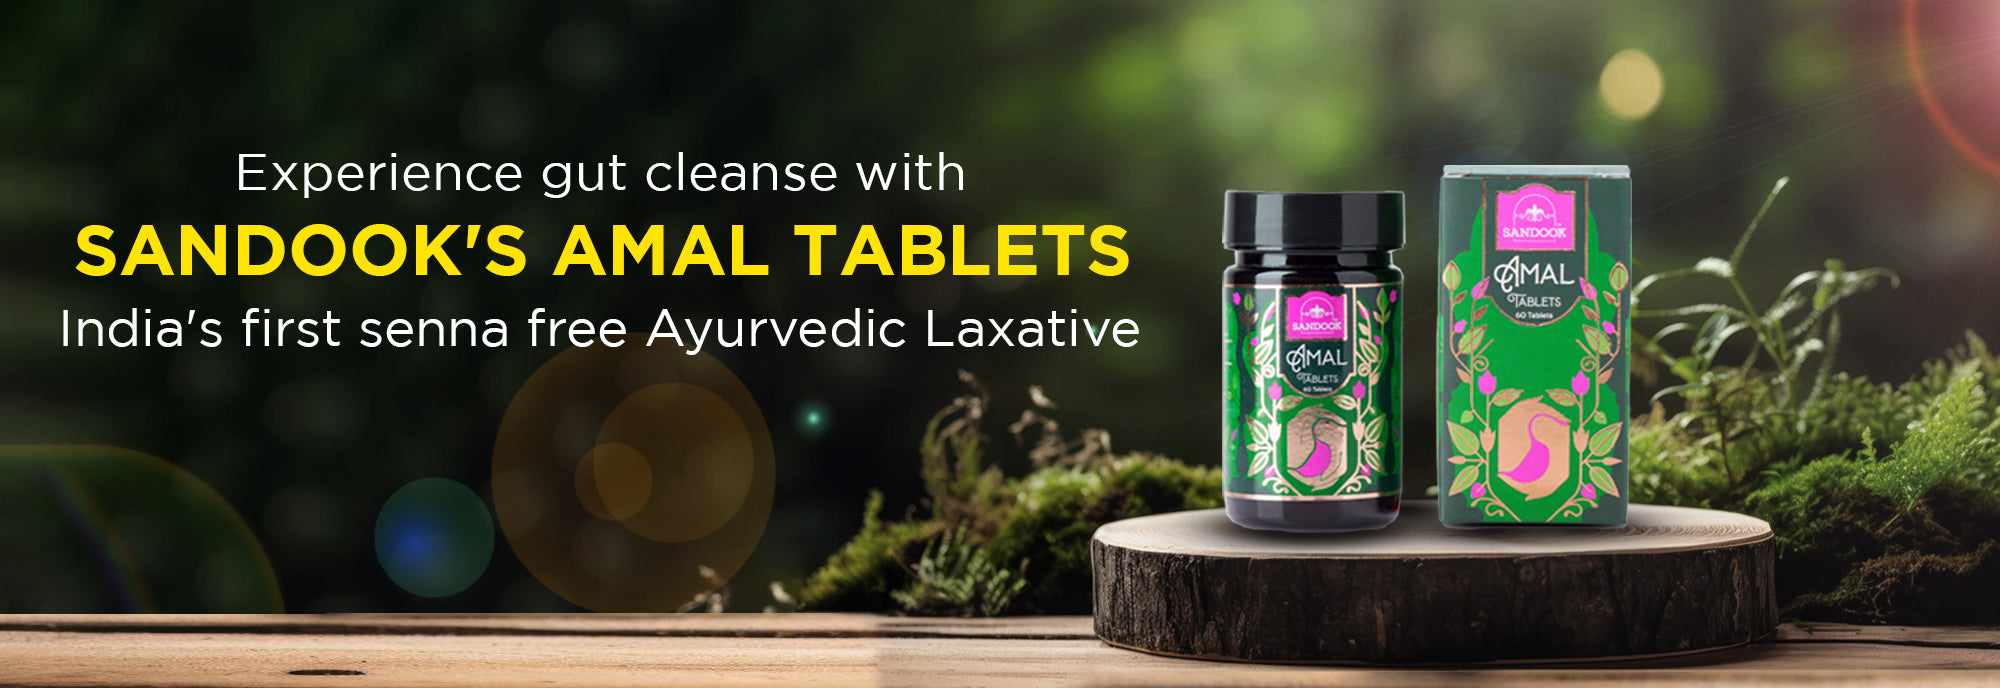 amal tablets product banner